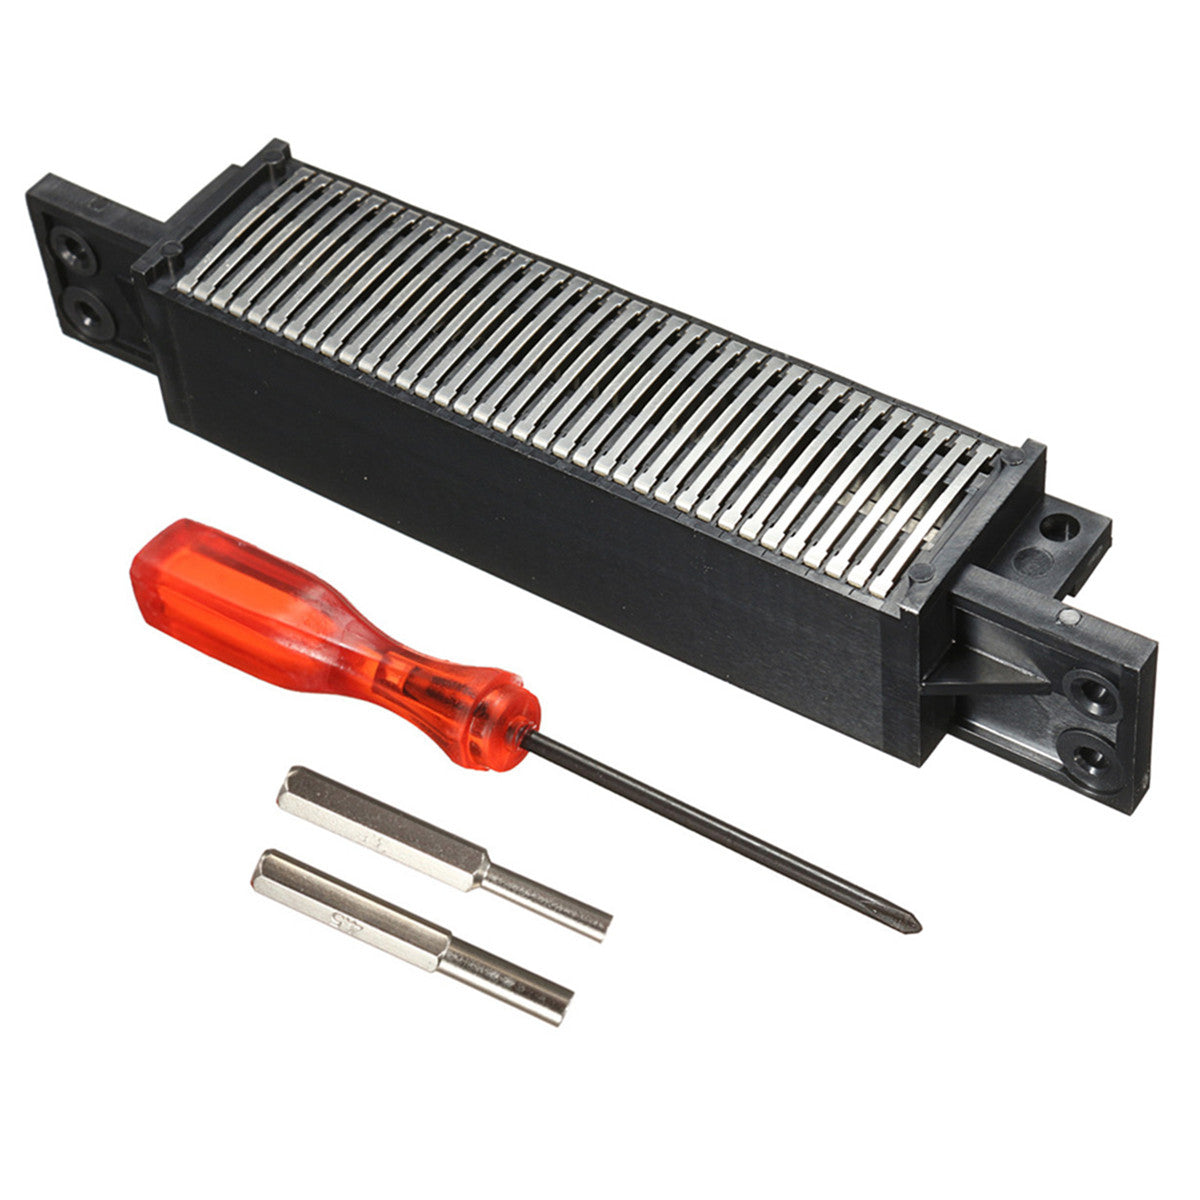 Replacement 72 Pin Connector With 3.8mm Bit Screwdriver for Nintendo NES Game Console